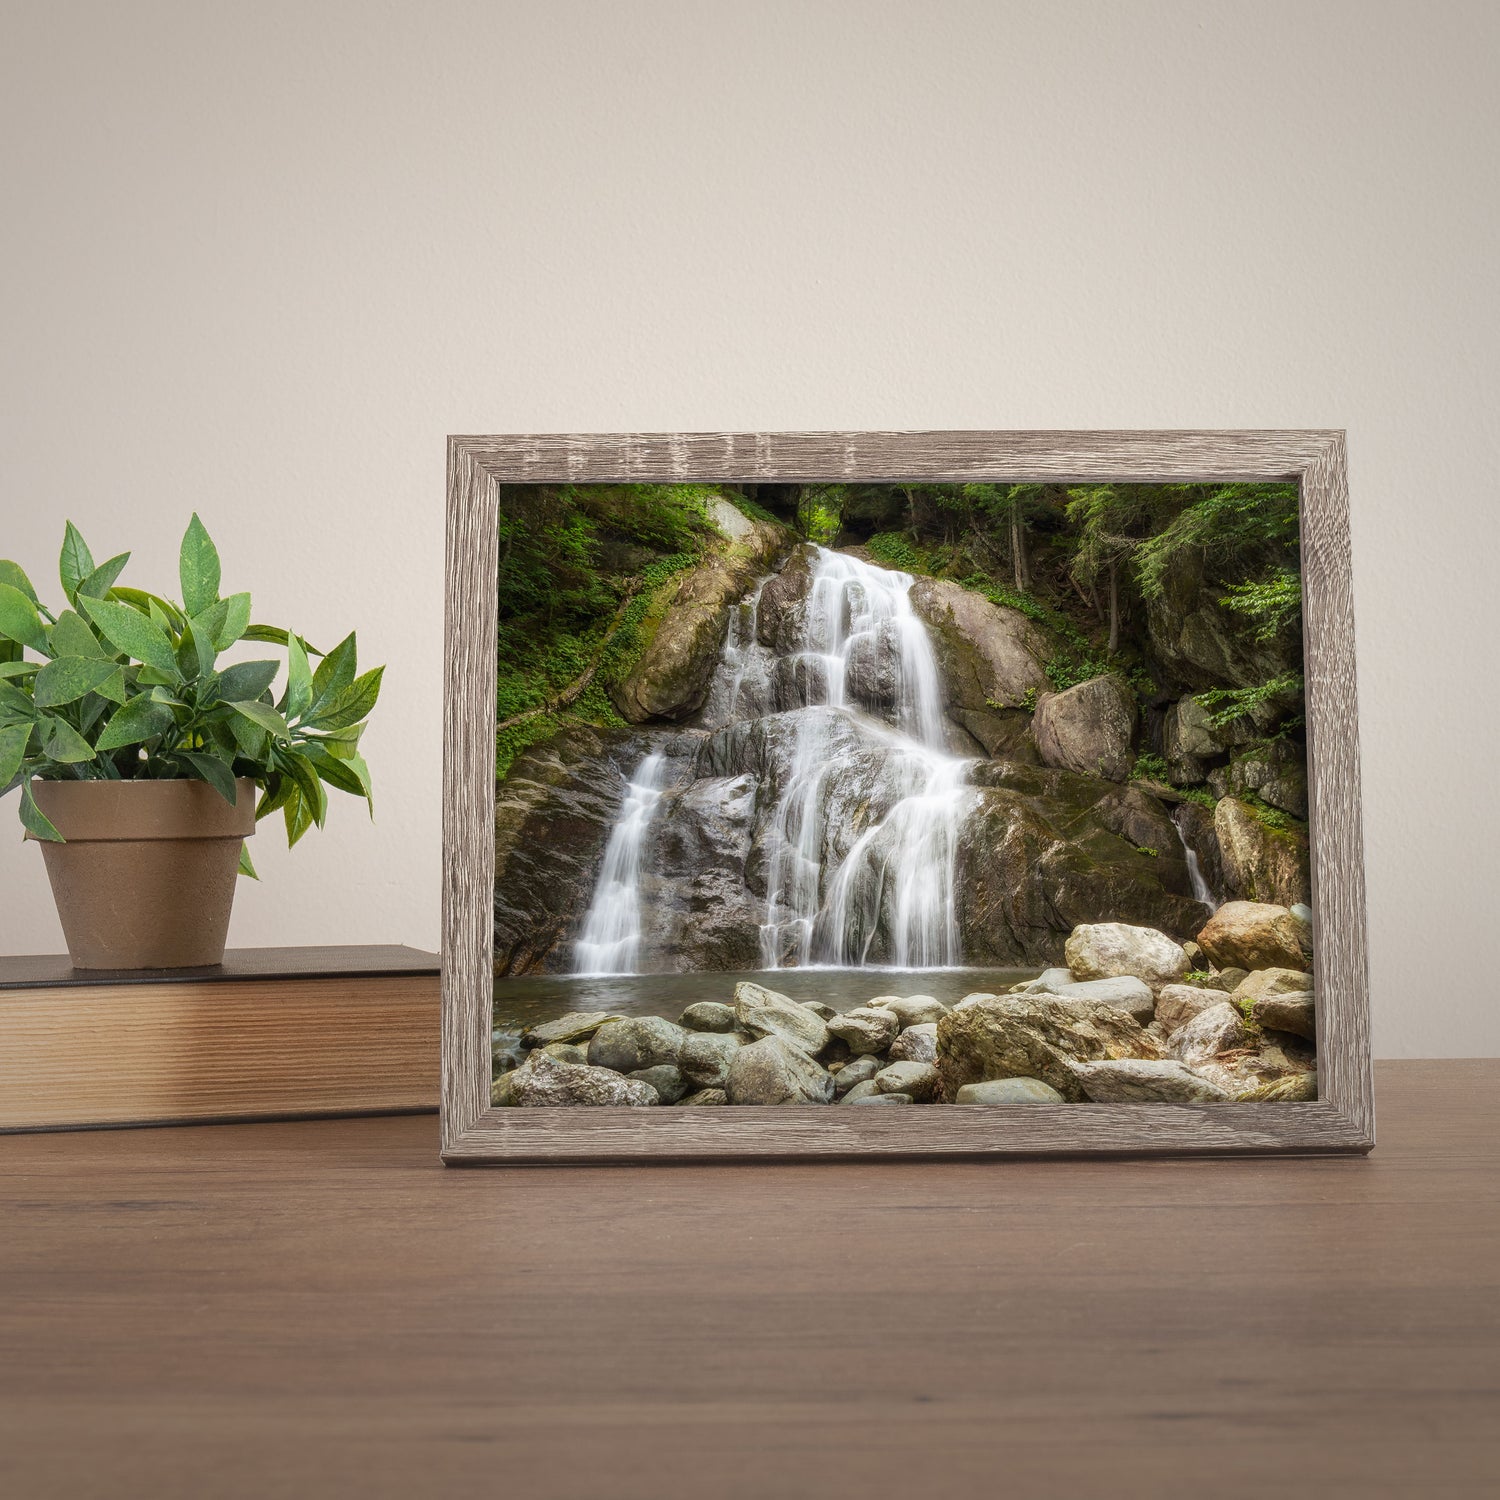 Vermont Art capturing a mesmerizing waterfall – the epitome of Nature Photography Print excellence.